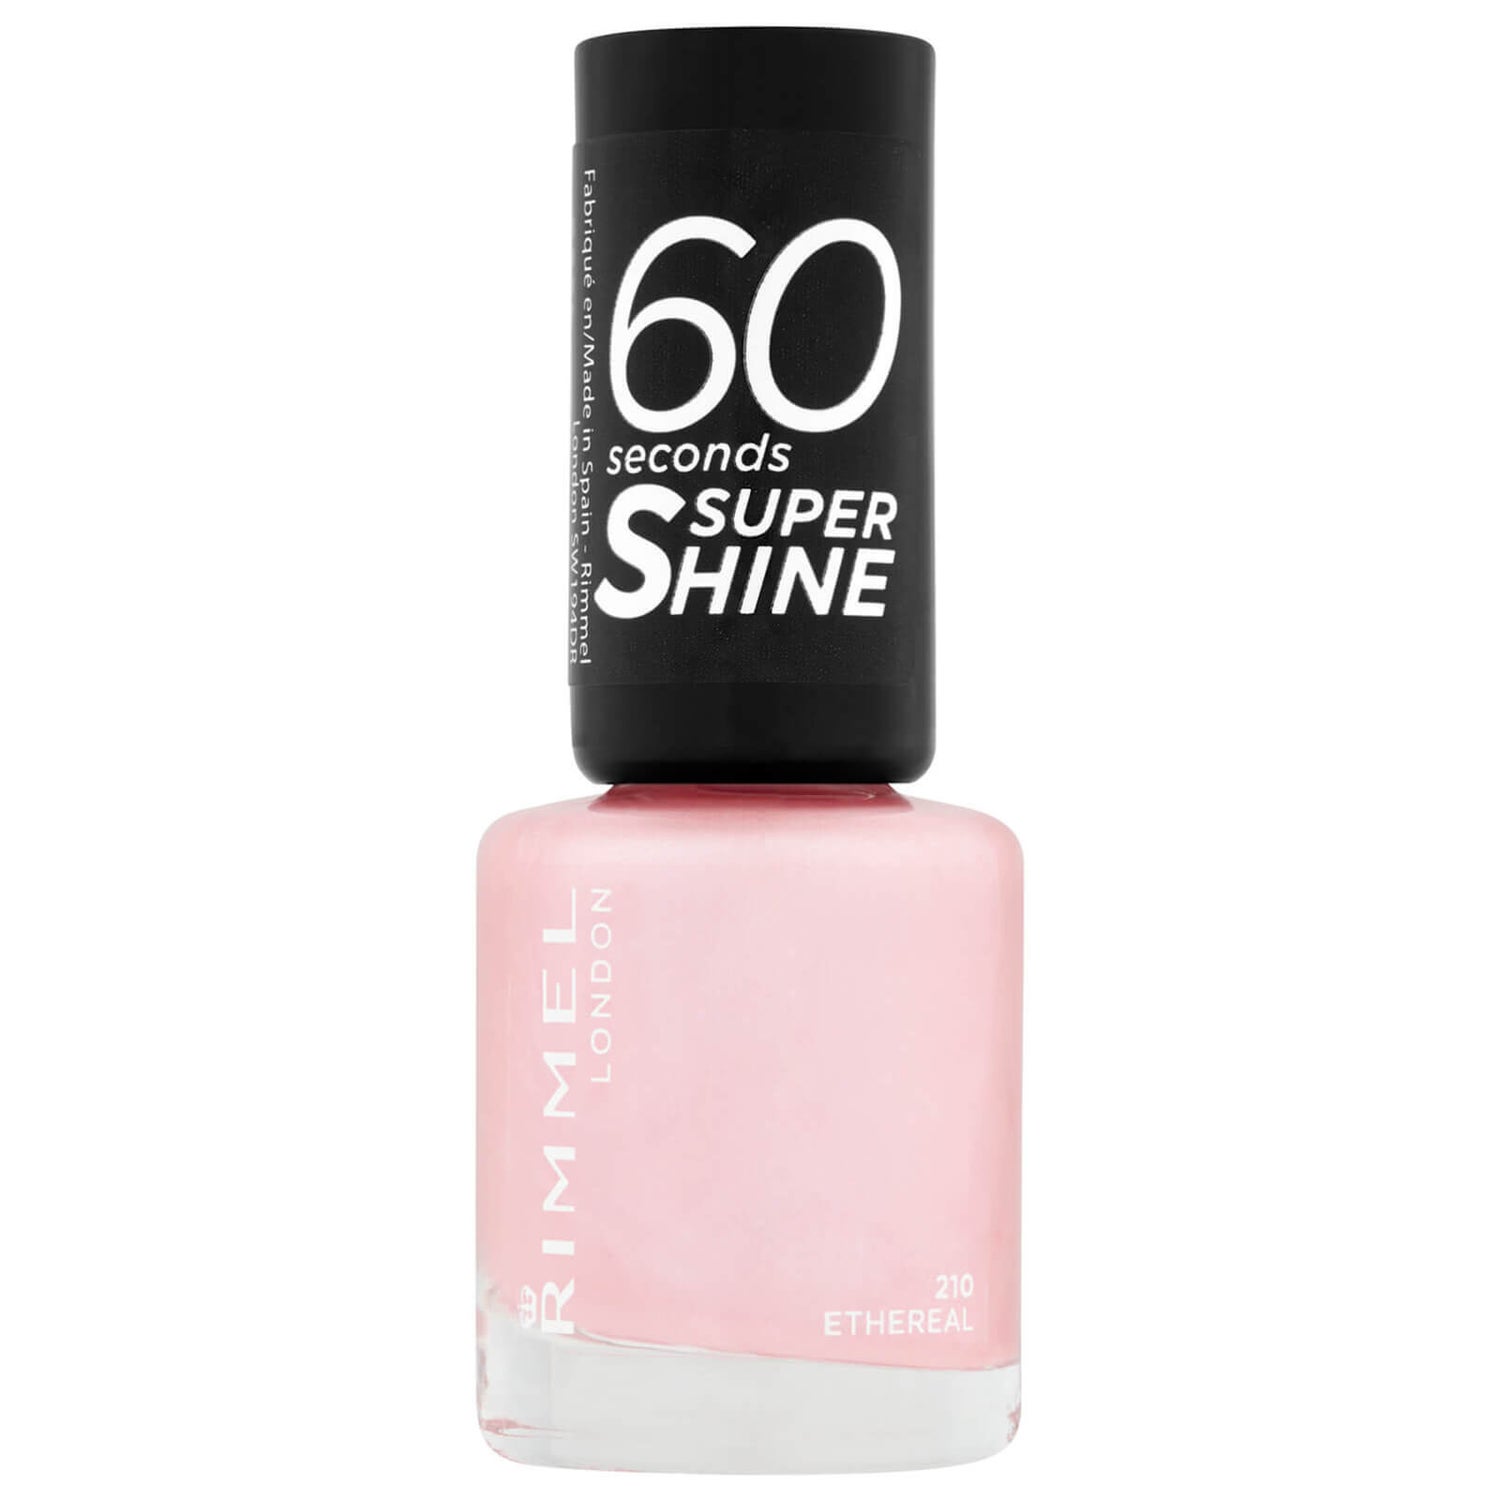 Rimmel 60 Seconds Super Shine Nail Polish, 271 Jet Setting, 8 ml : Buy  Online at Best Price in KSA - Souq is now Amazon.sa: Beauty